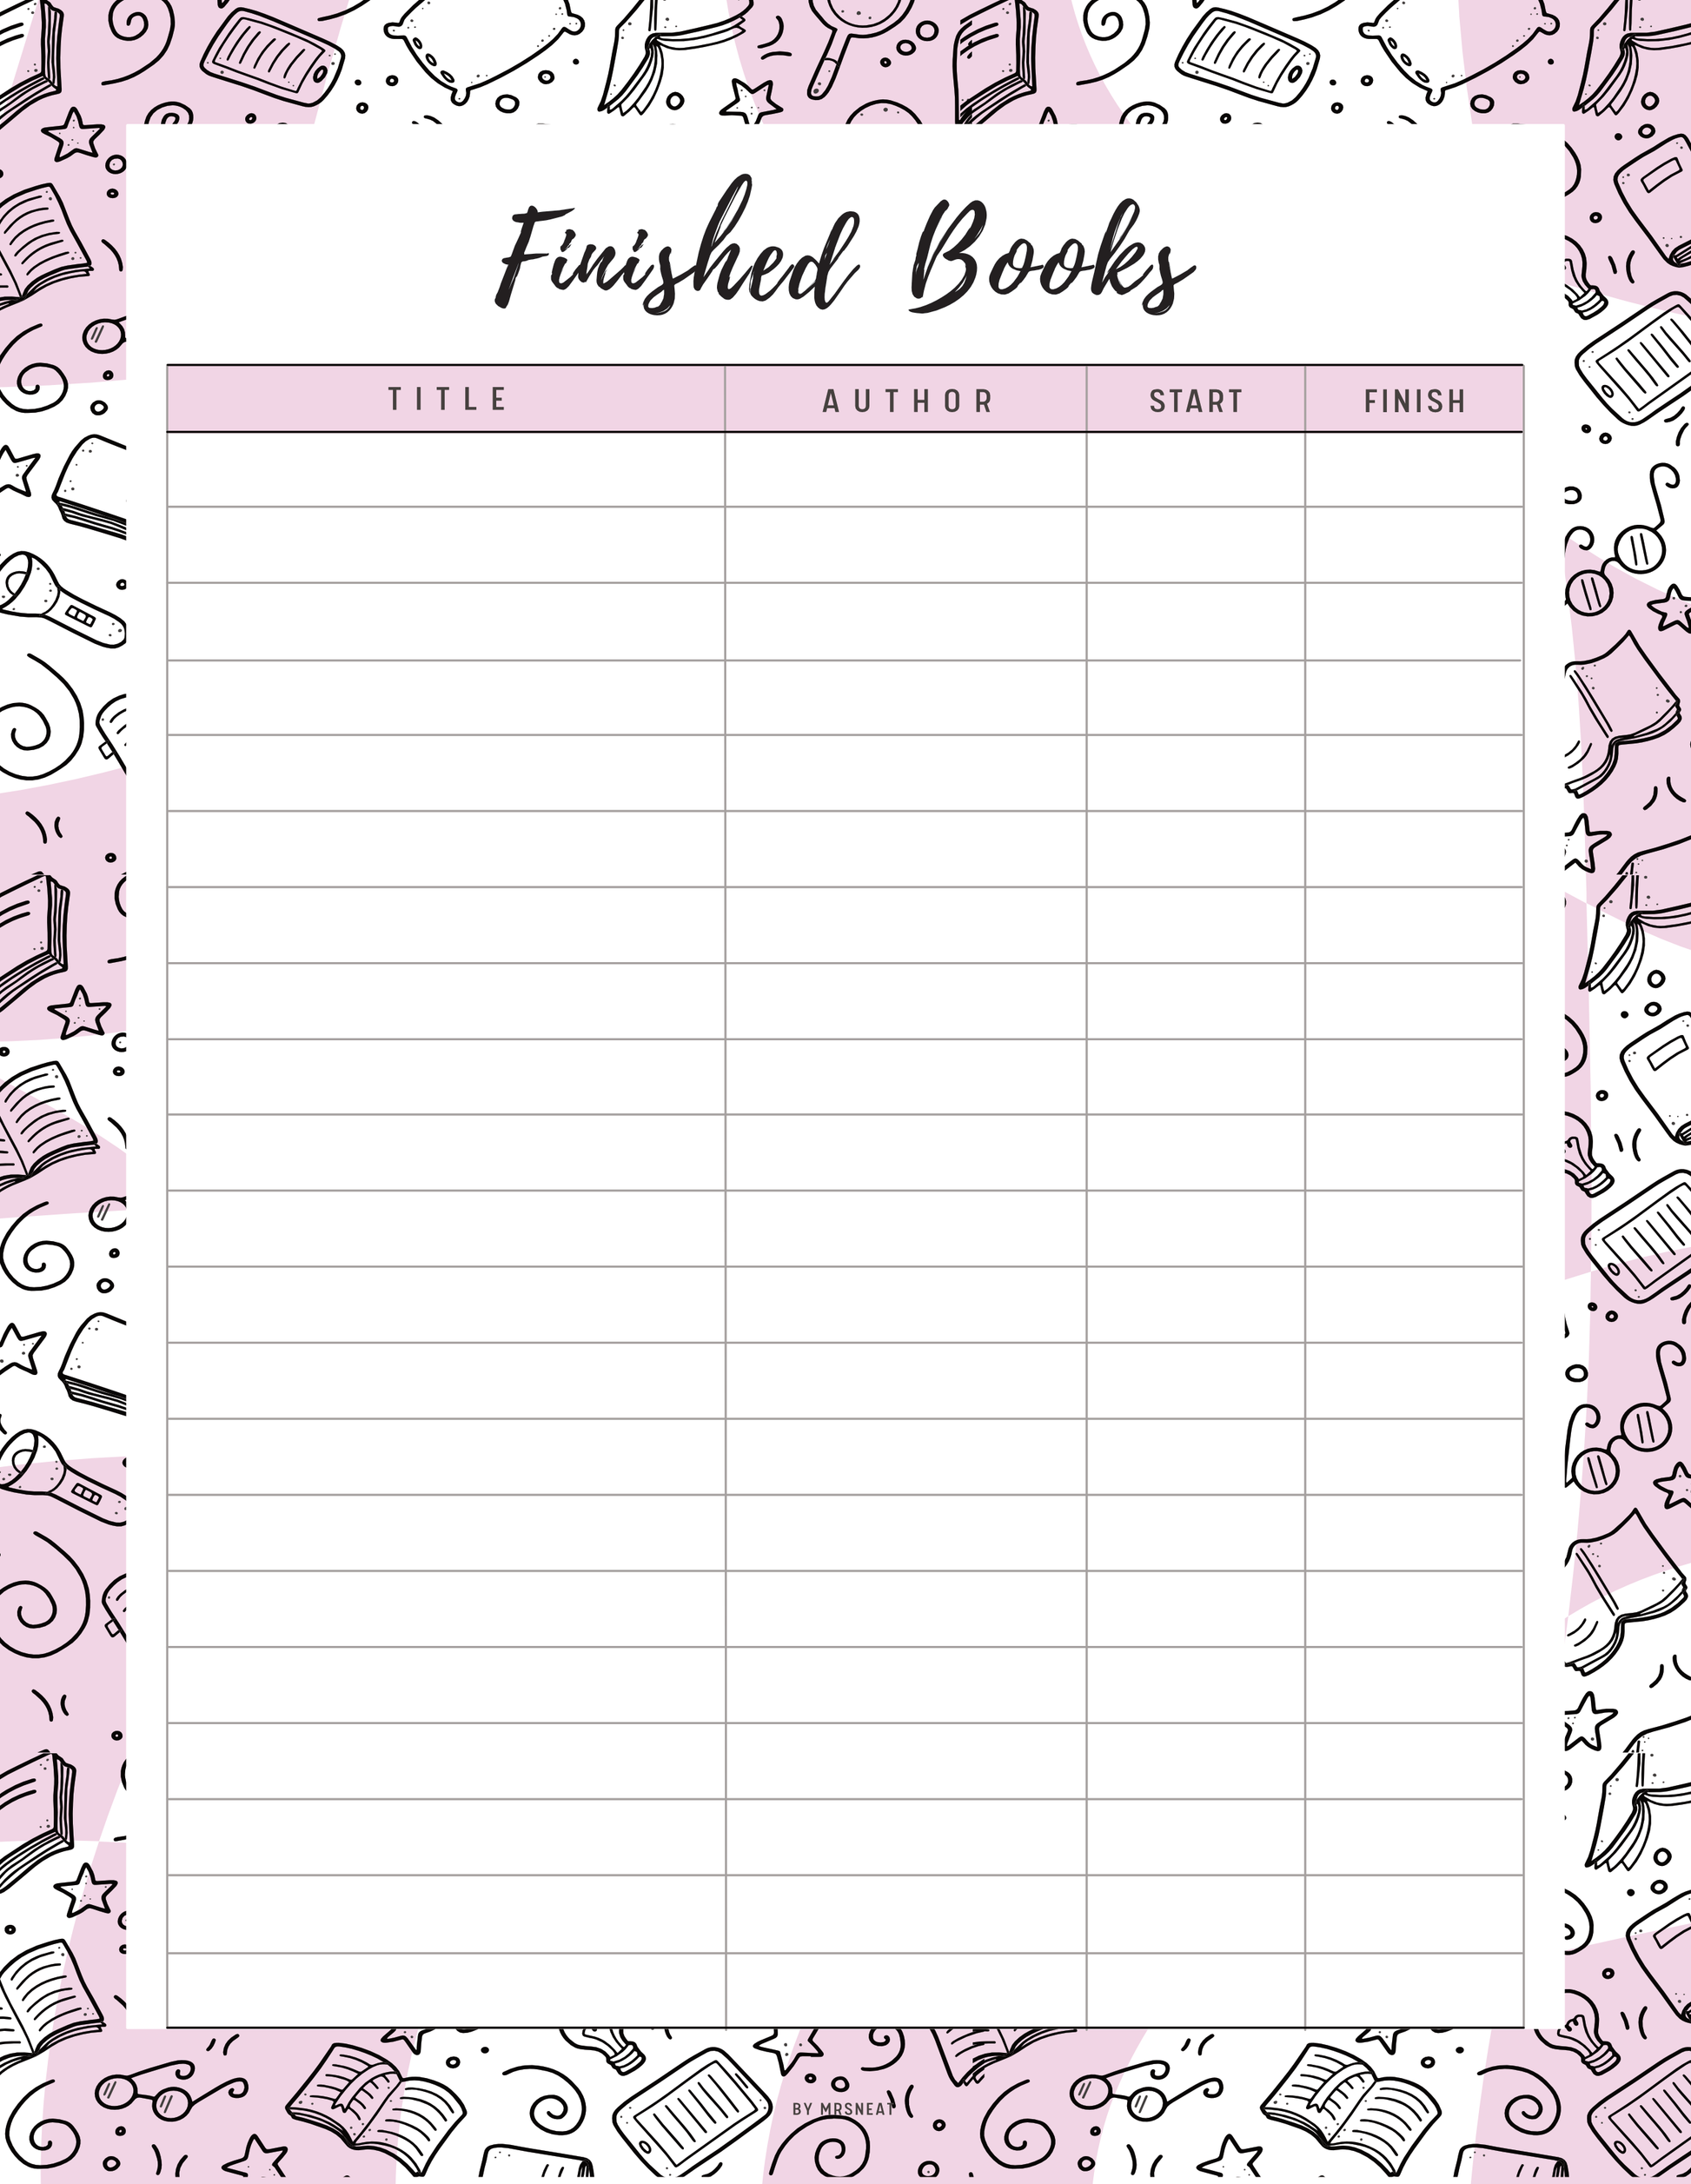 Books I have Read Template Printable, 5 colors ; Peach, Pink, Blue, Green, Neutral, 4 sizes ; A4, A5, Letter, Half Letter, Digital Planner